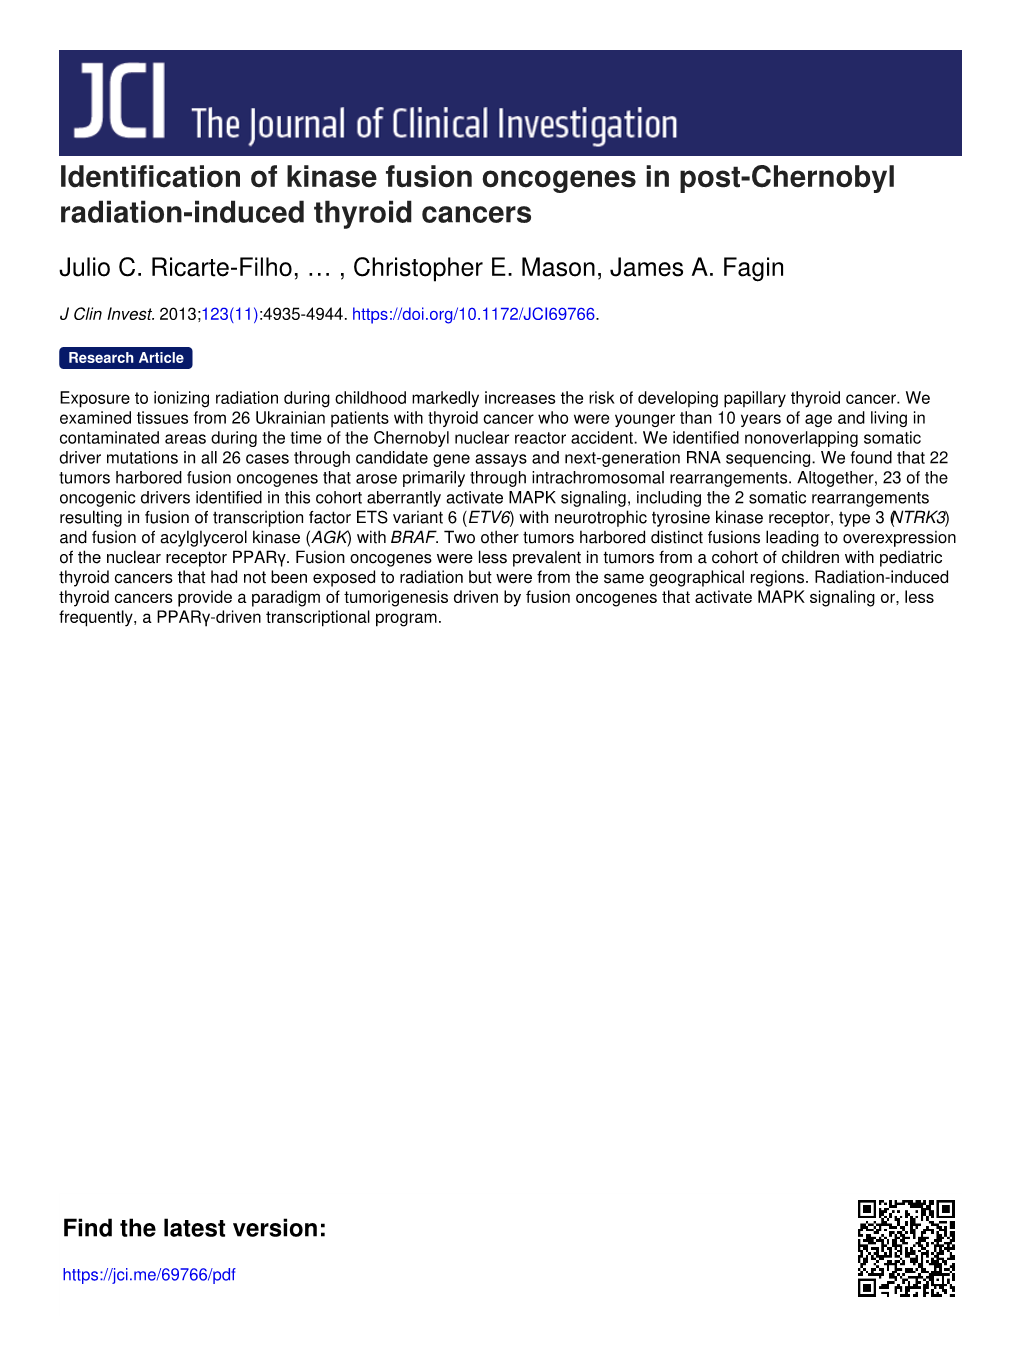 Identification of Kinase Fusion Oncogenes in Post-Chernobyl Radiation-Induced Thyroid Cancers